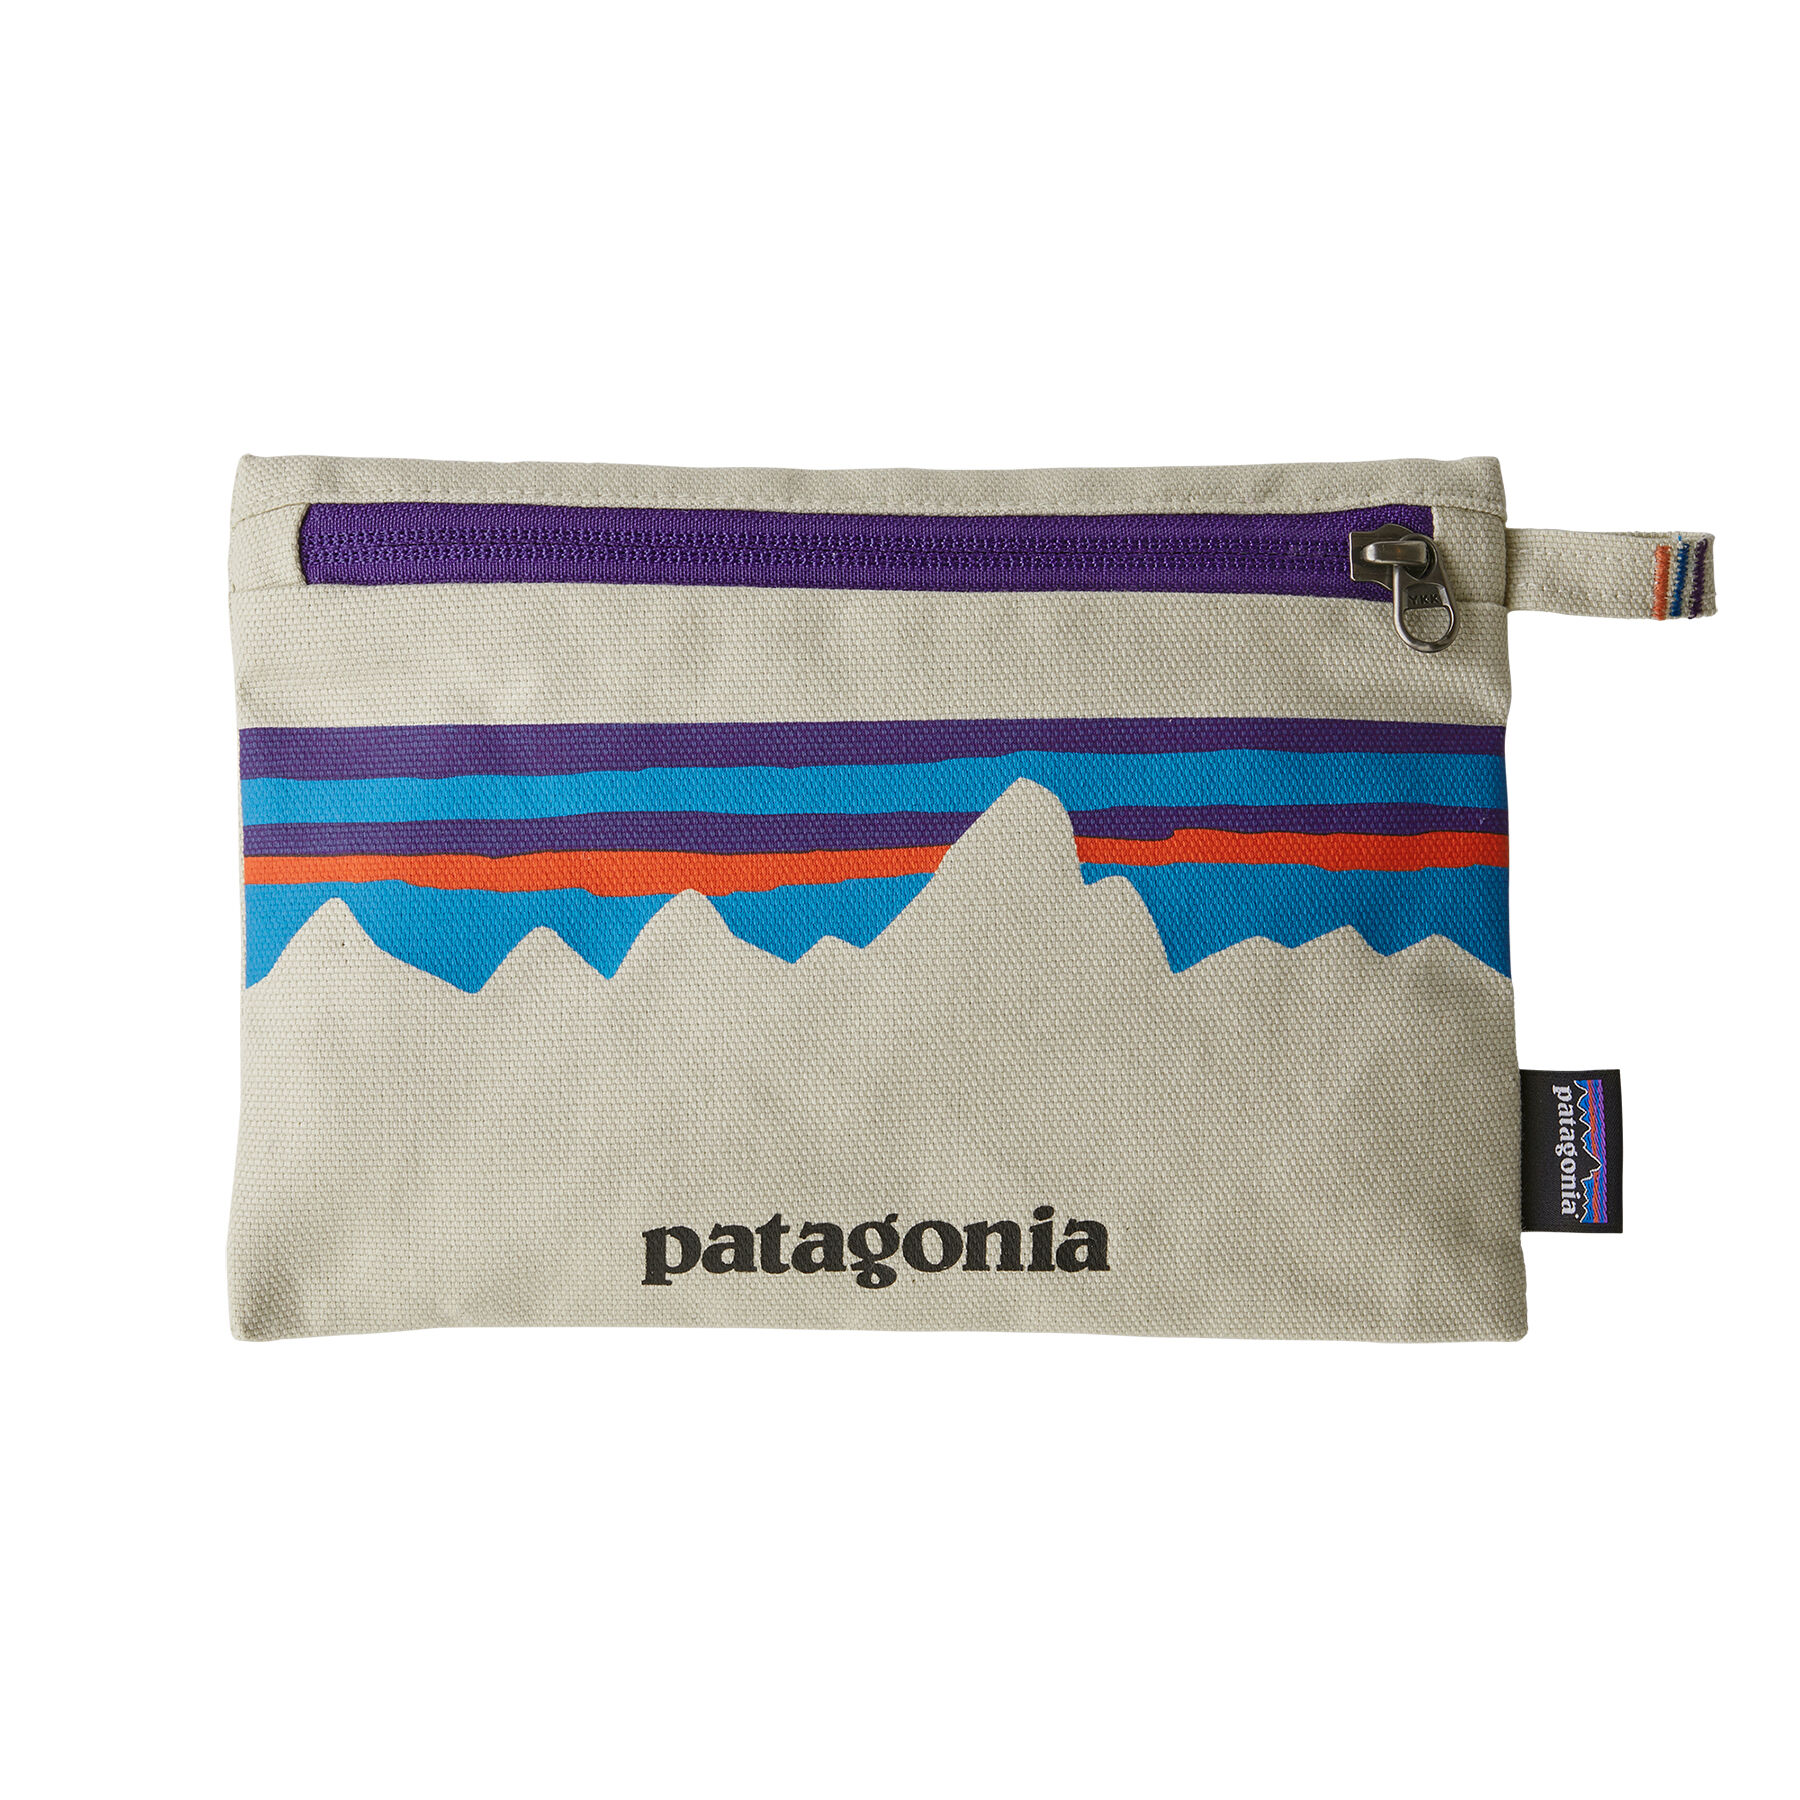 Patagonia Zippered Pouch | Hardloop